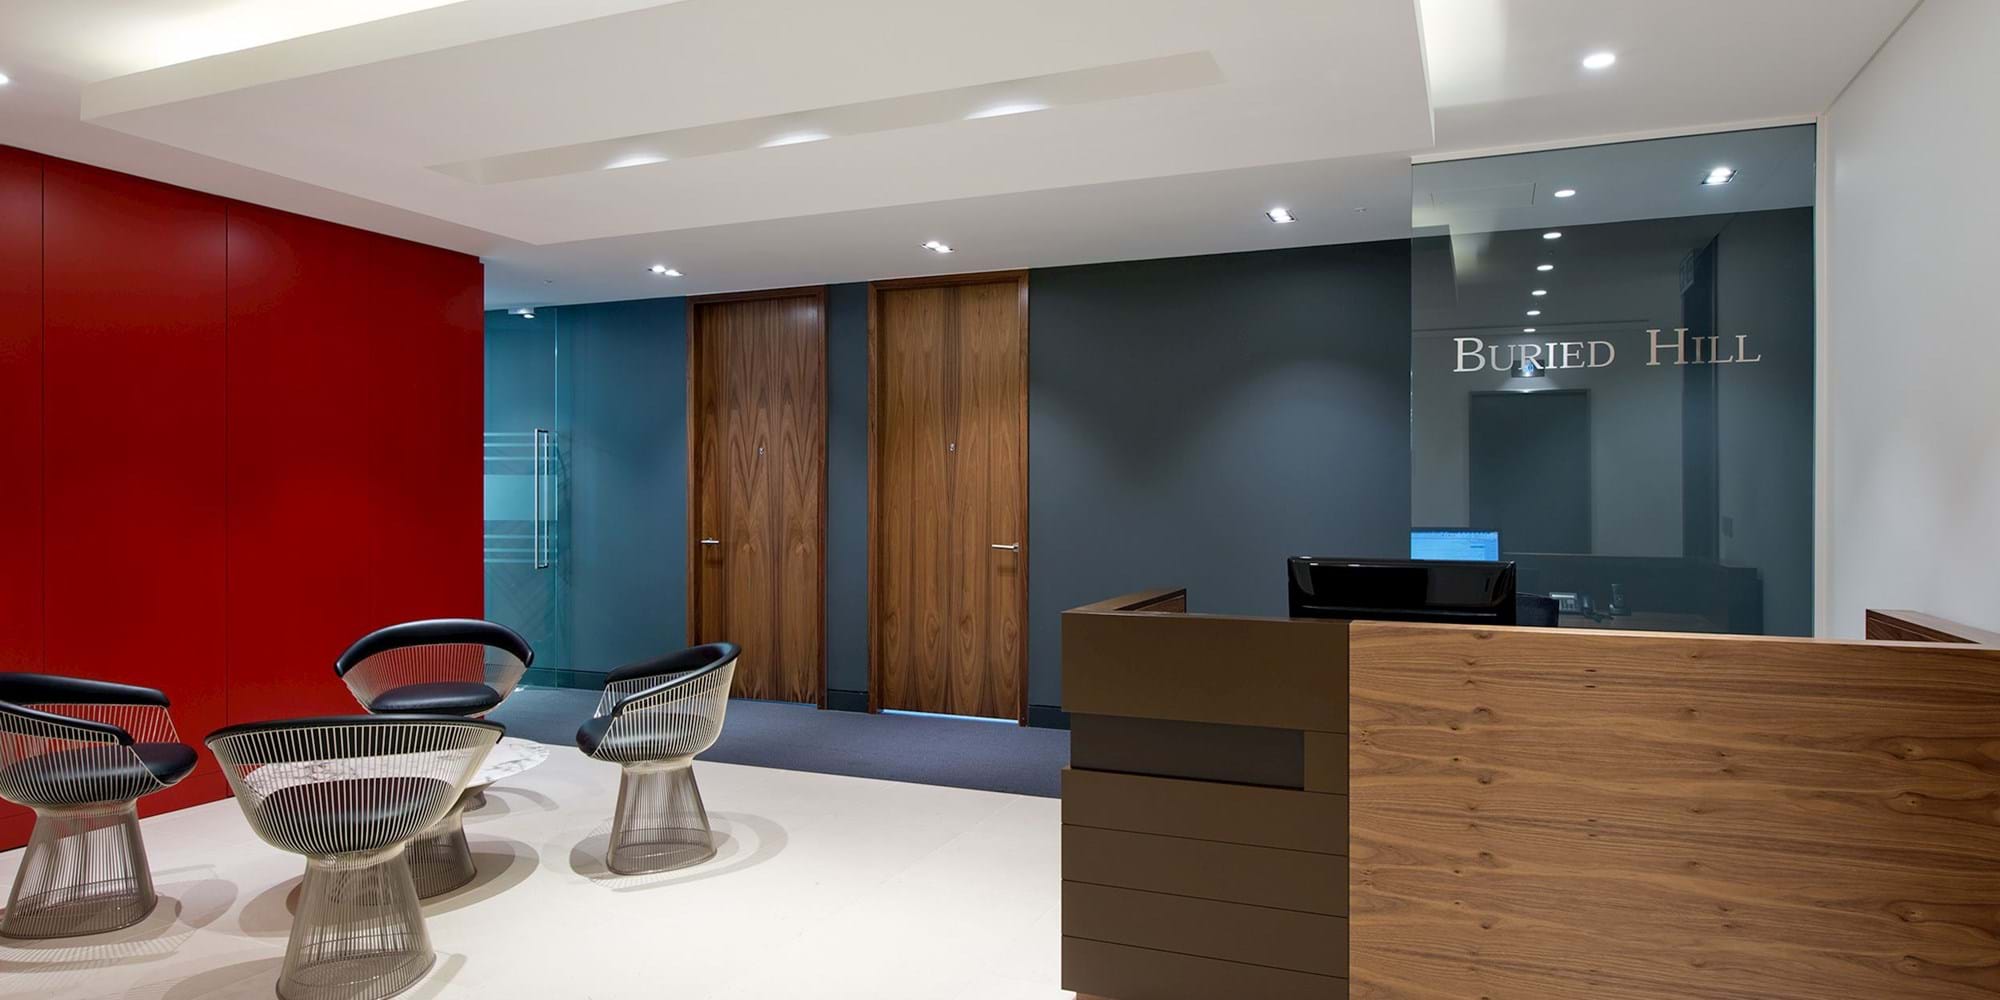 Modus Workspace office design, fit out and refurbishment - Buried Hill - Reception - Buried_Hill 01_highres_sRGB.jpg